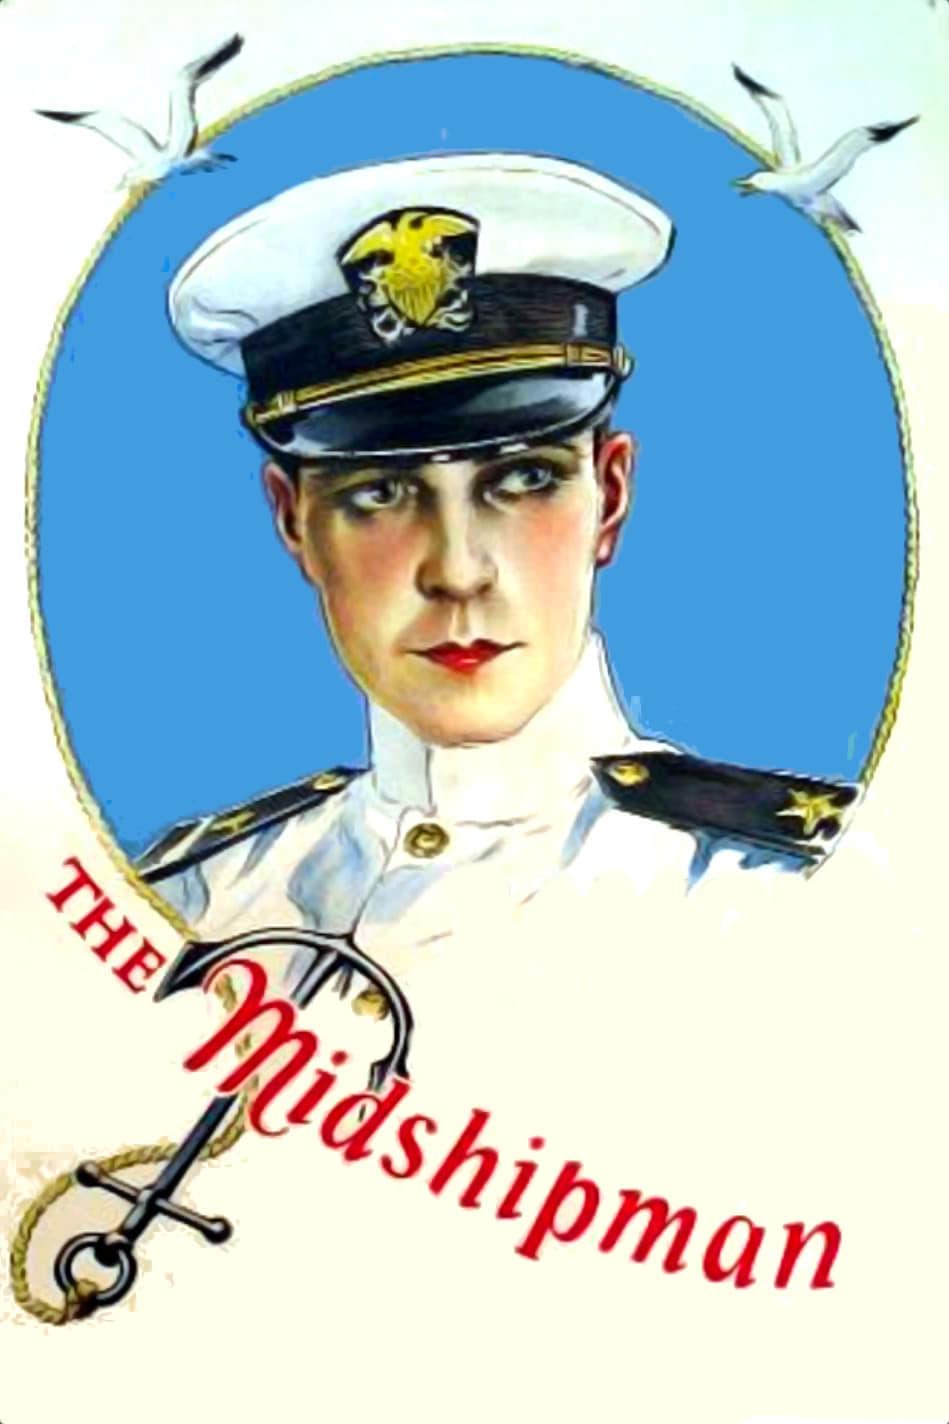 The Midshipman poster